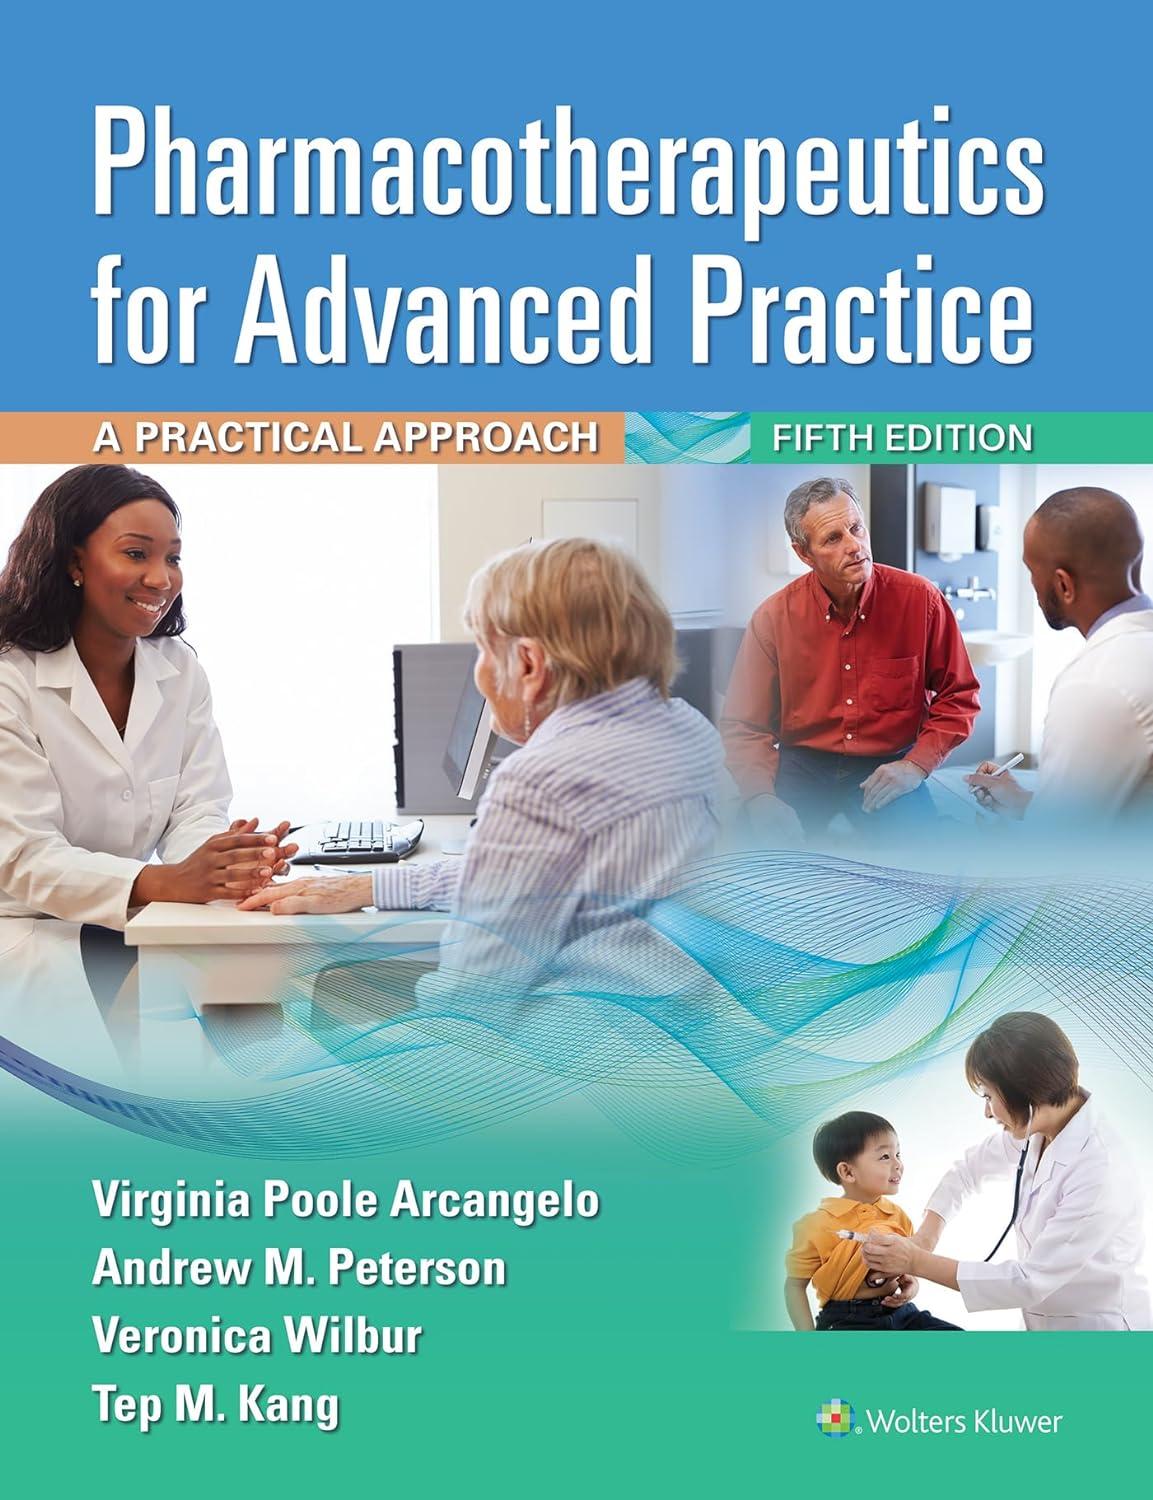 pharmacotherapeutics for advanced practice a practical approach 5th edition virginia poole arcangelo, andrew